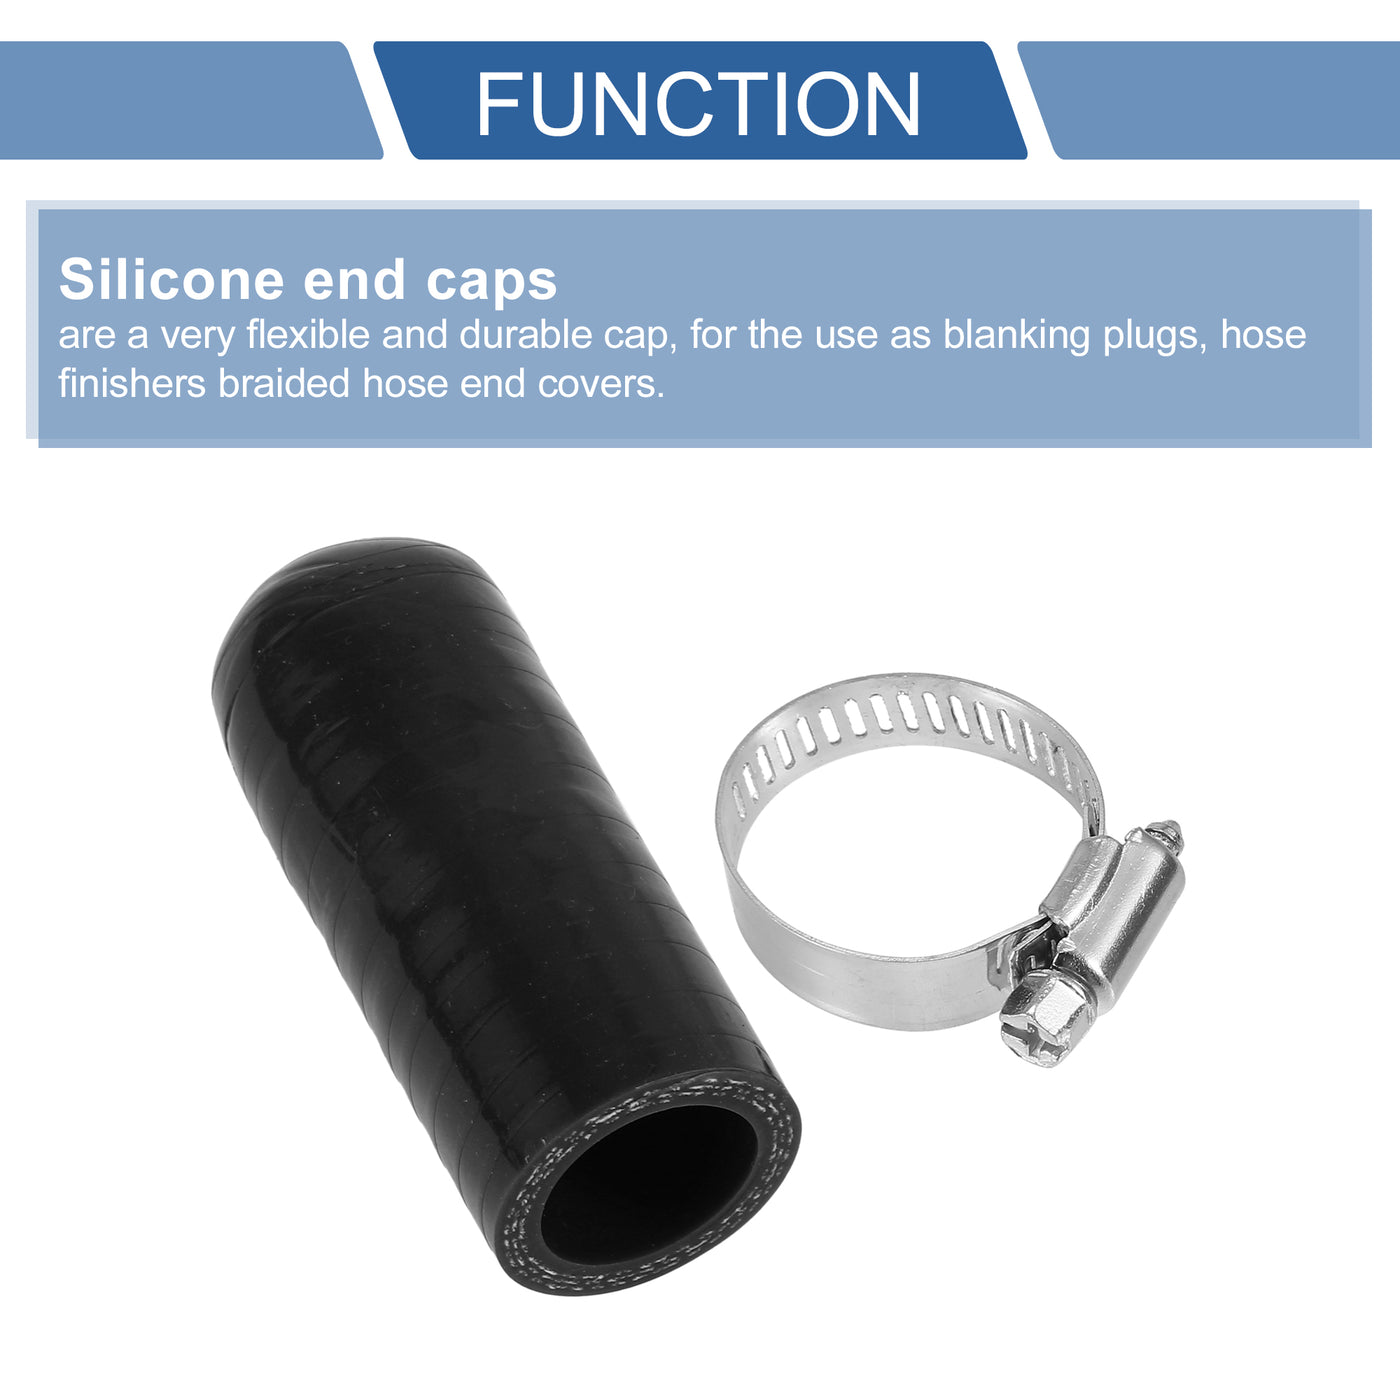 X AUTOHAUX 1 Pcs 60mm Length 22mm/0.87" ID Black Car Silicone Rubber Hose End Cap with Clamp Silicone Reinforced Blanking Cap for Bypass Tube Universal